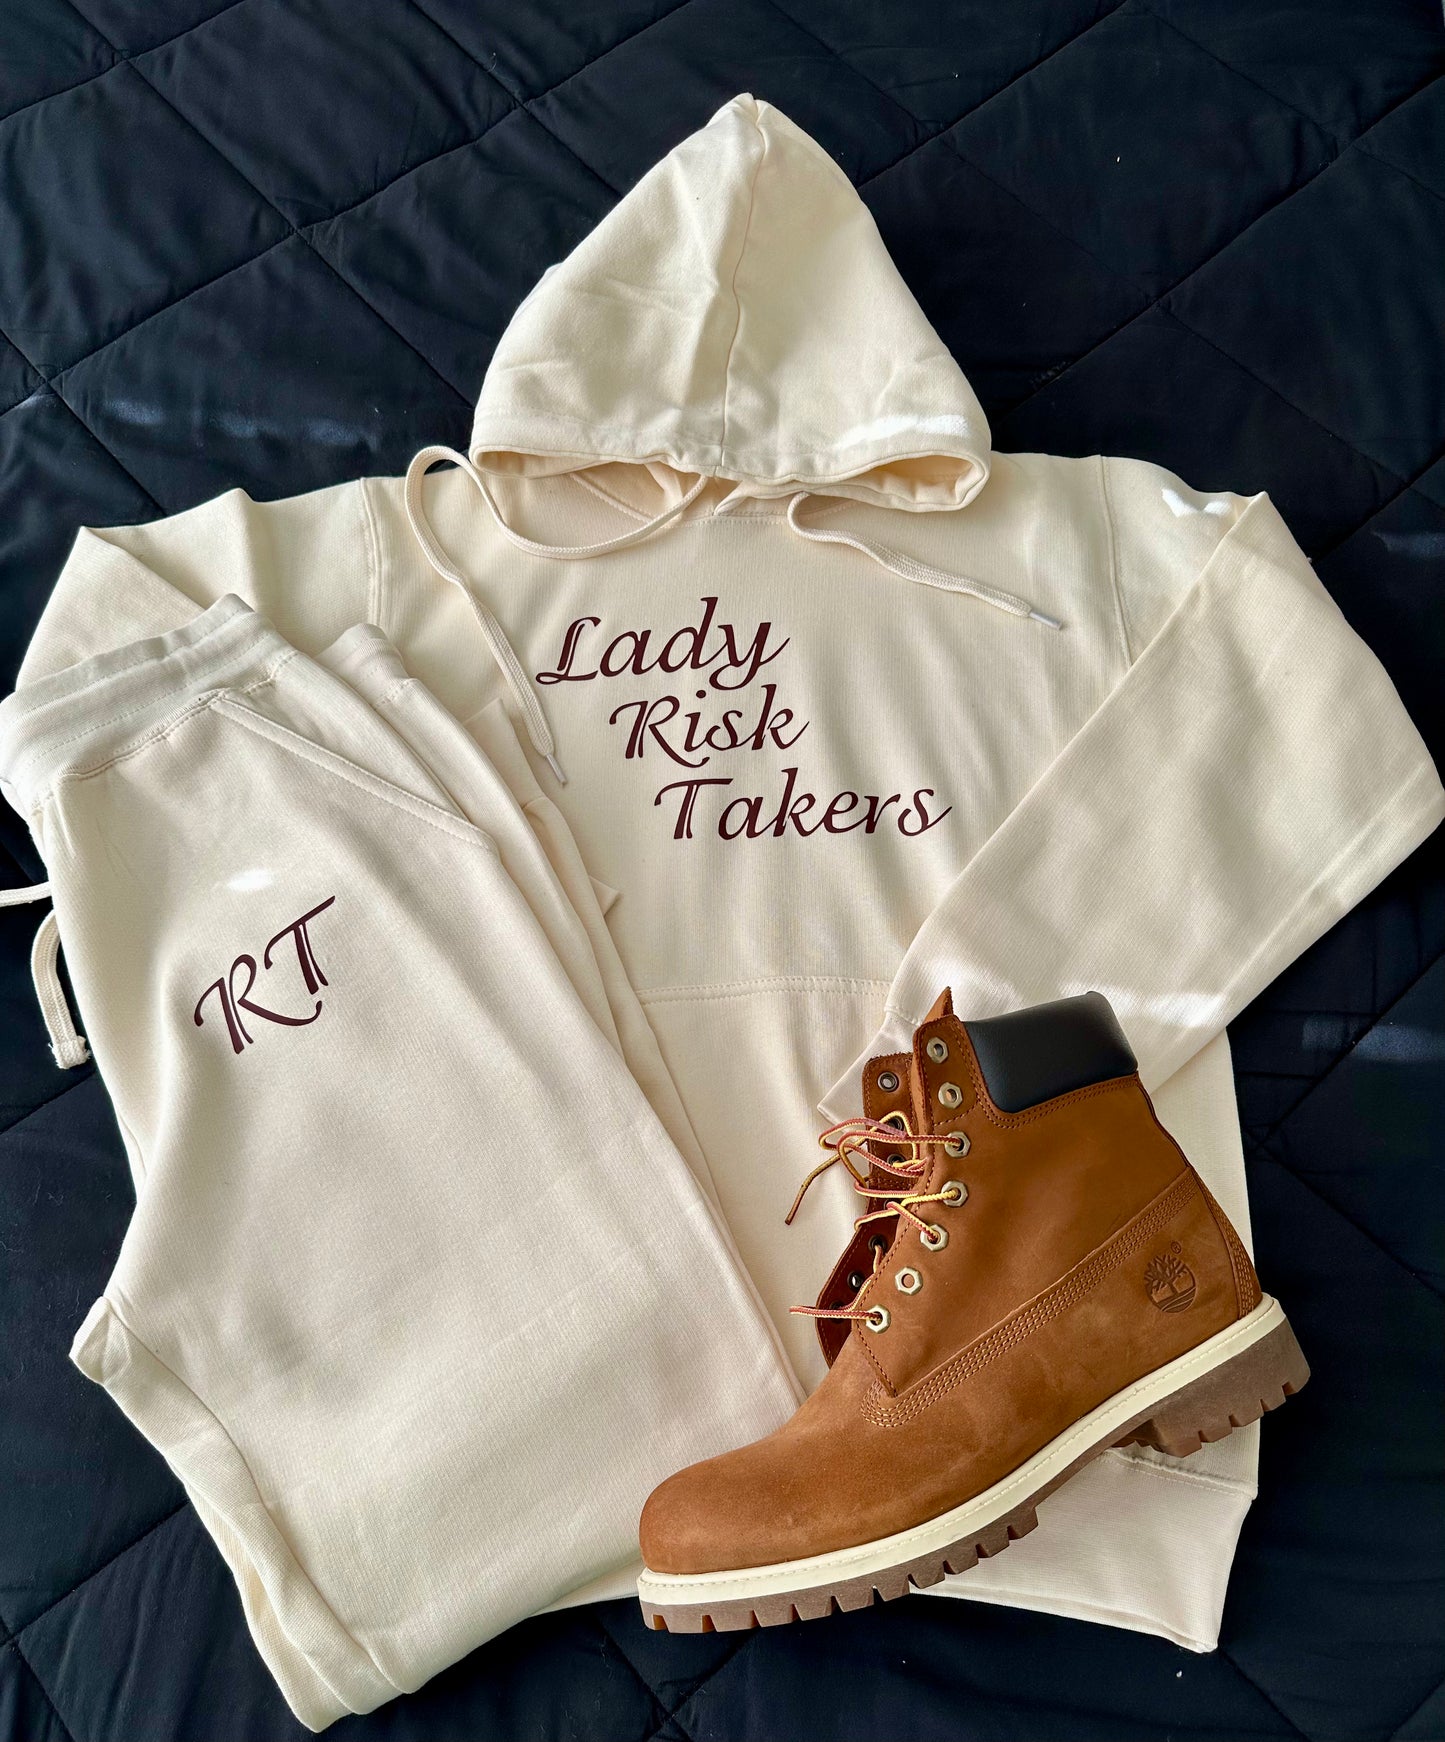 Tan And Chocolate “Lady Risk Takers” Sweatsuit